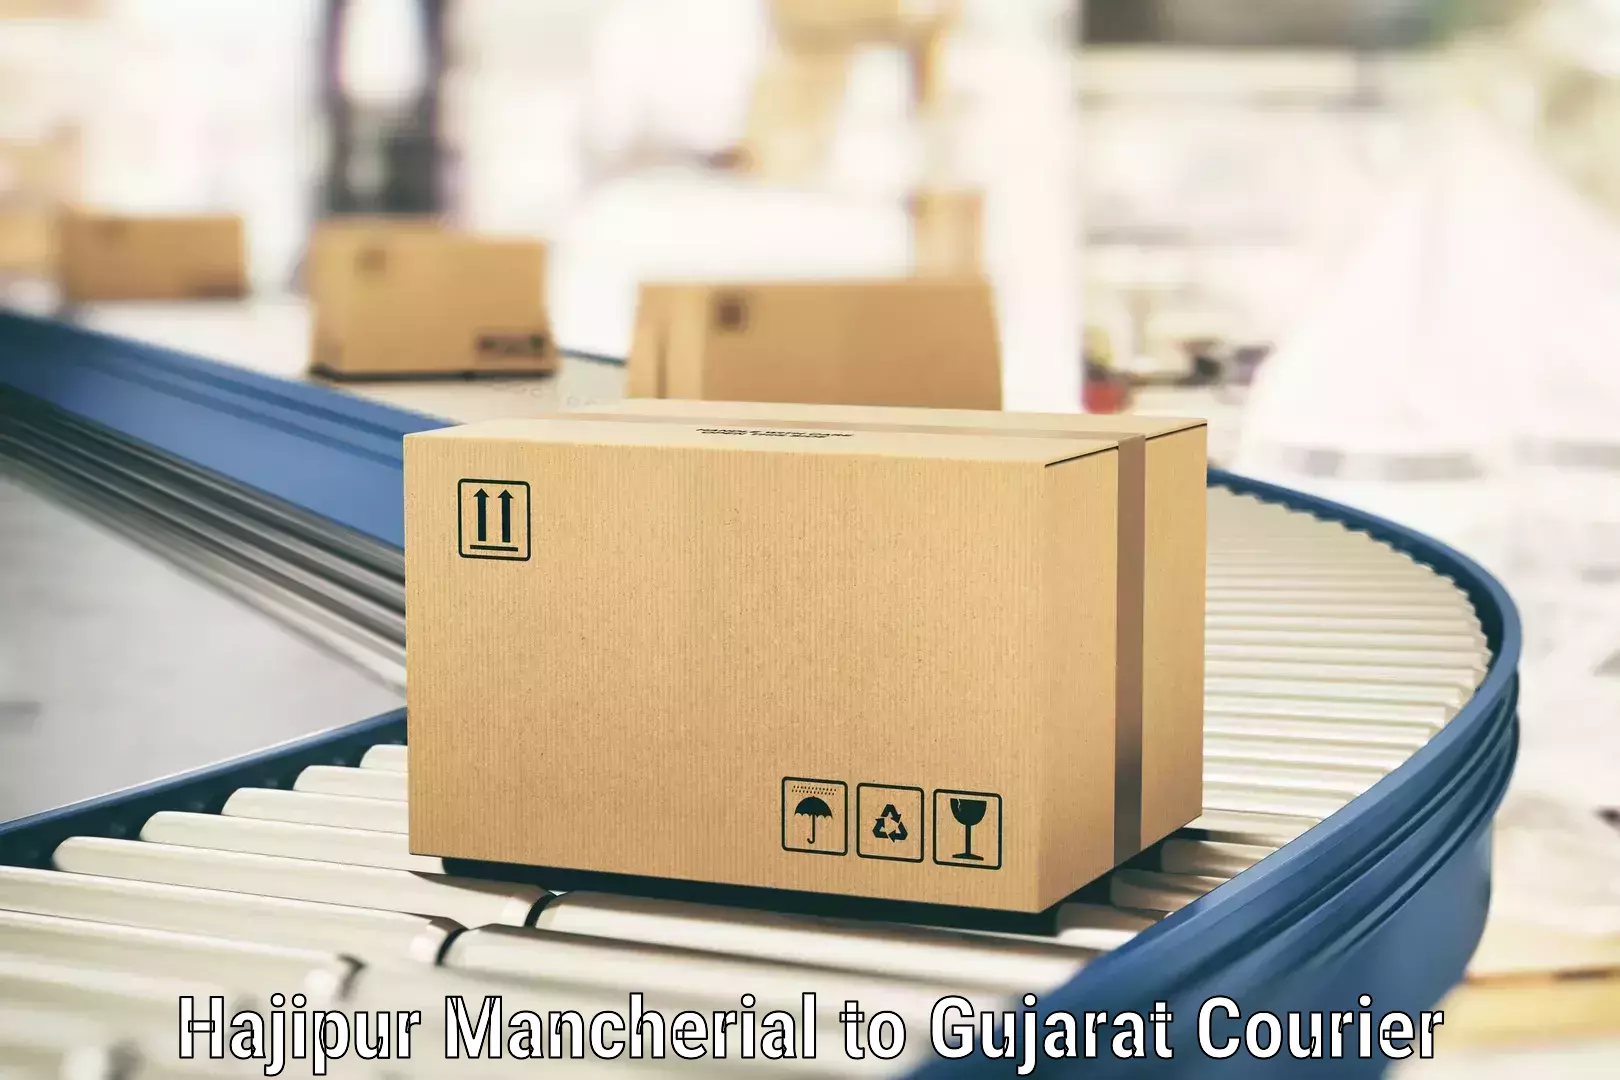 Secure package delivery Hajipur Mancherial to Dahegam